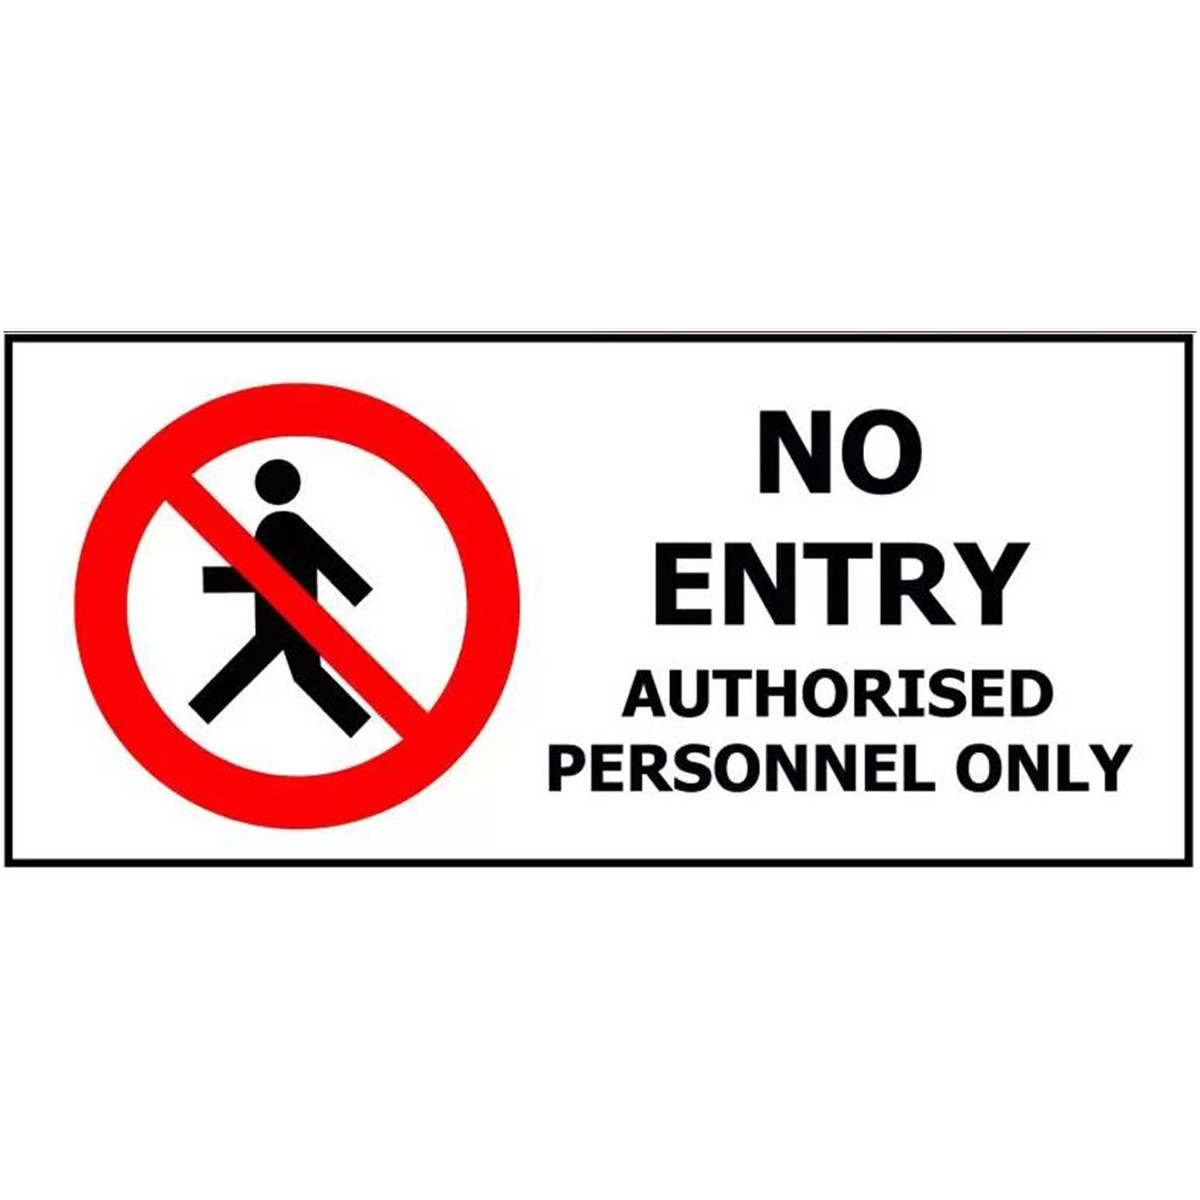 NO ENTRY AUTHORISED PERSONNEL ONLY 340 x 240mm Vinyl on PVC (no screw holes)